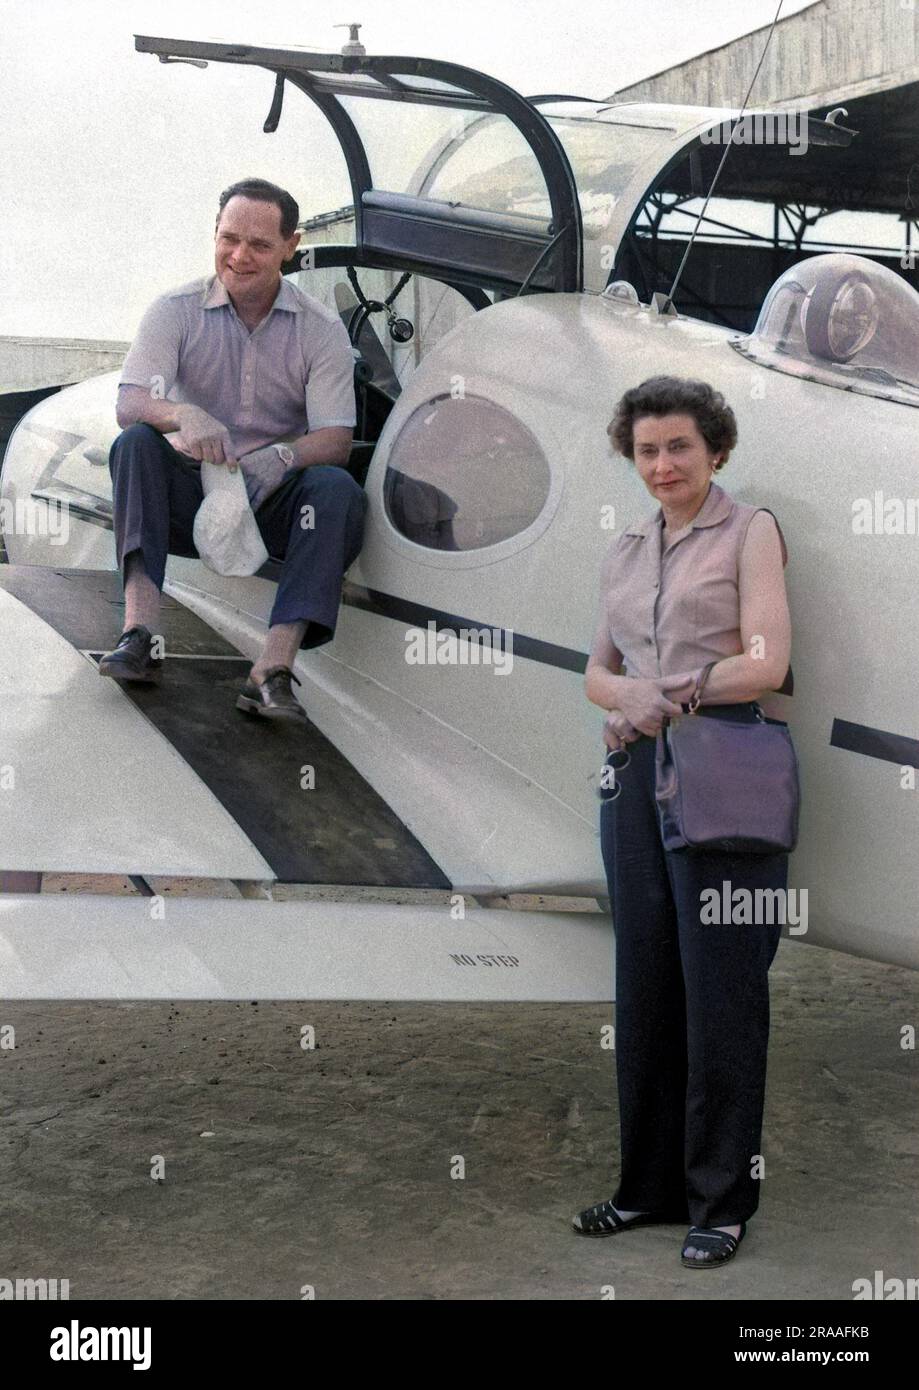 Douglas Bader (1910-1982) RAF fighter ace, pictured with his wife and a light aircraft at Lungi Airport, Sierra Leone, West Africa.     Date: late 1950s Stock Photo